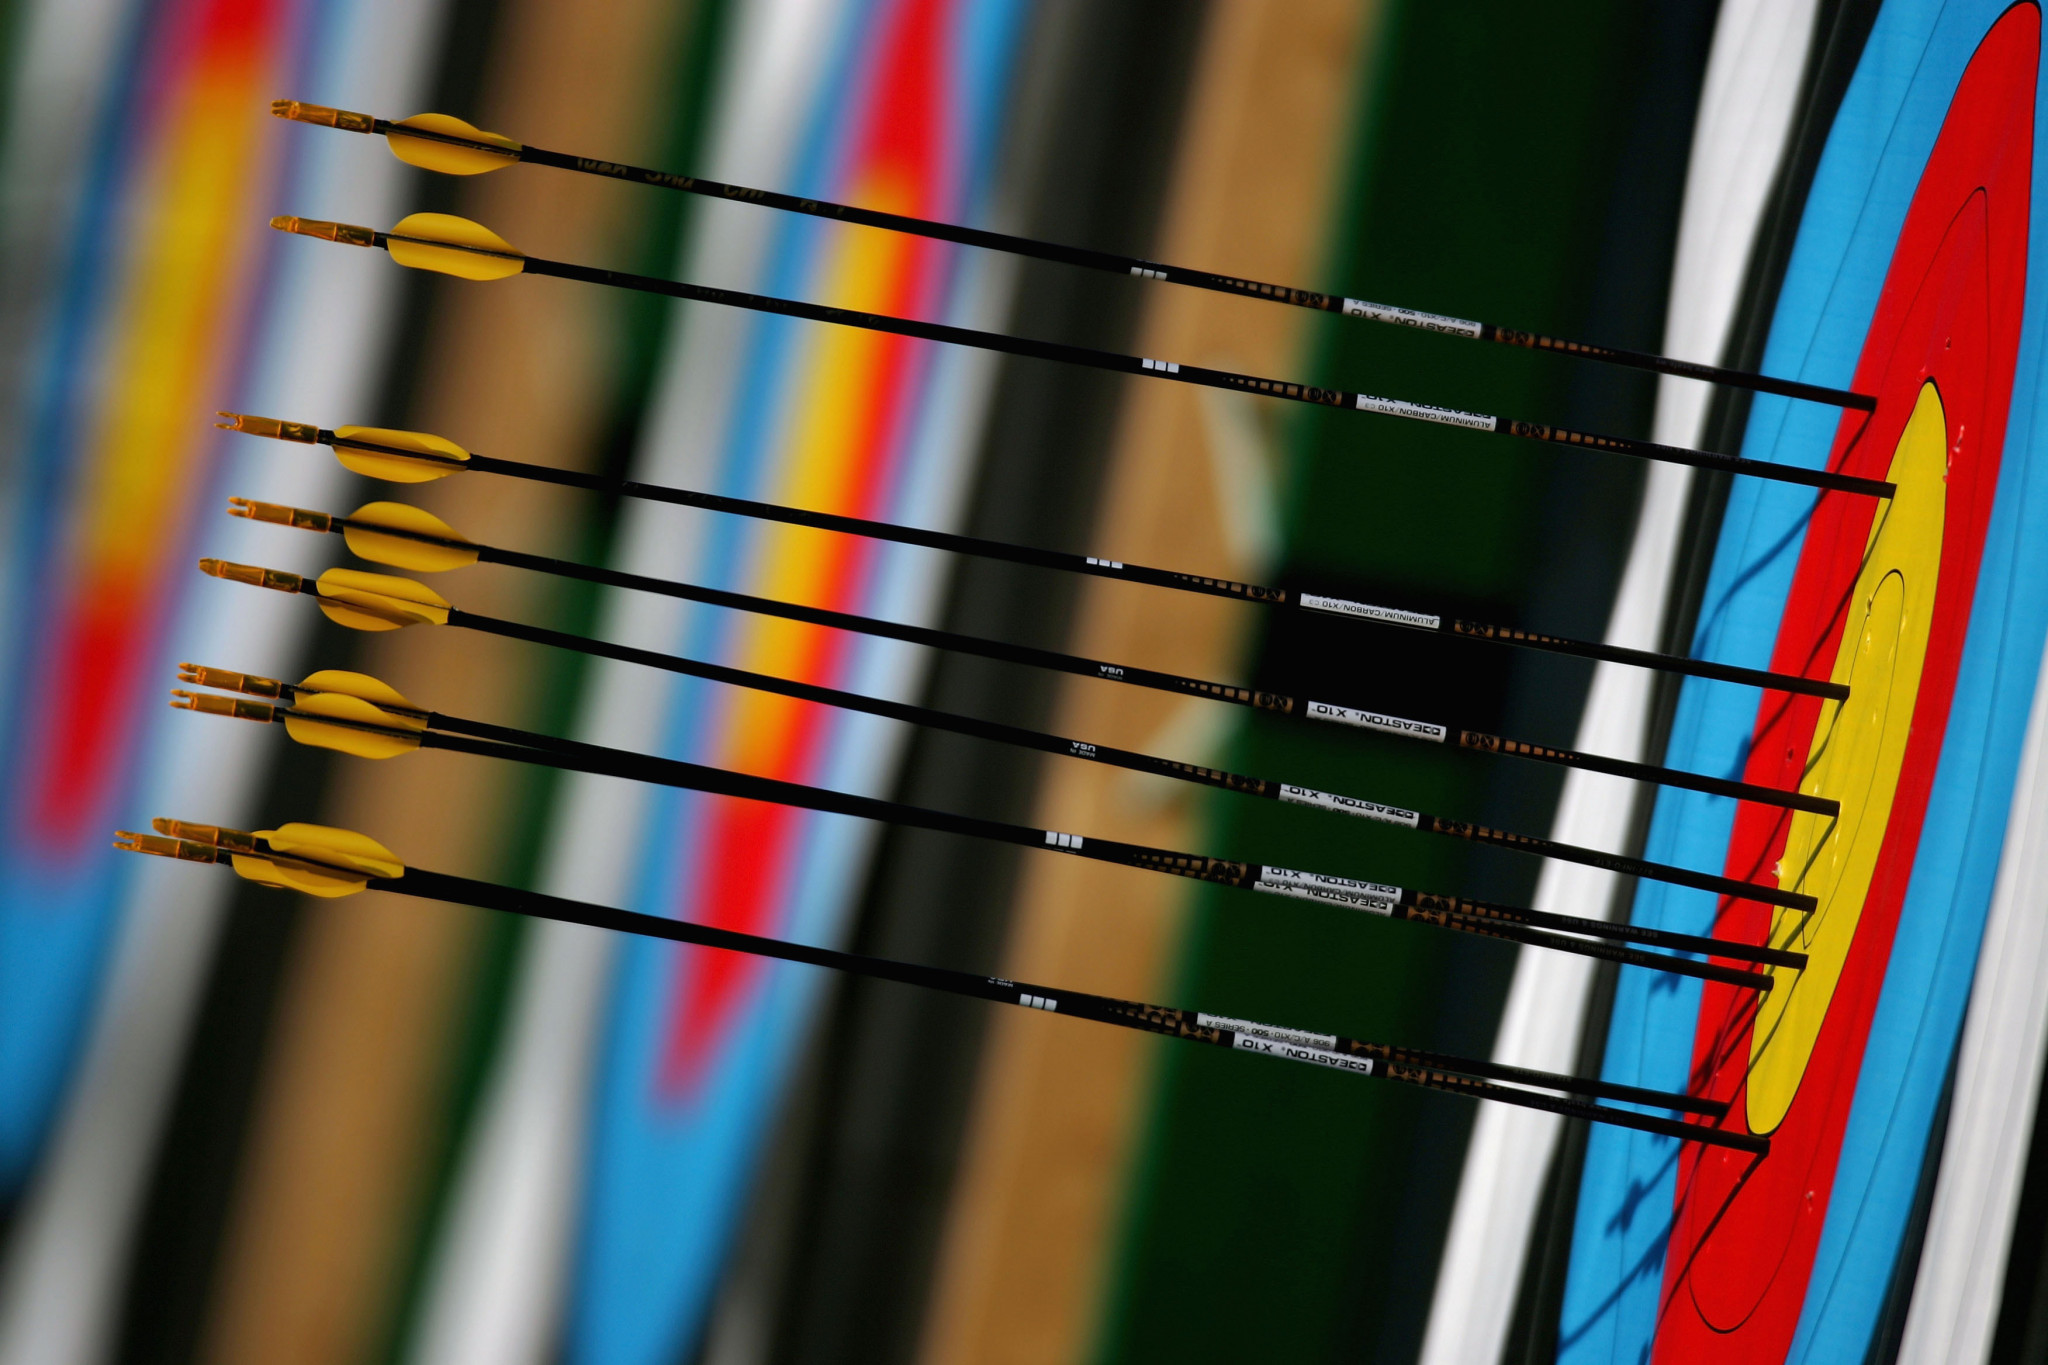 All continental governing bodies post improved score in latest World Archery governance review